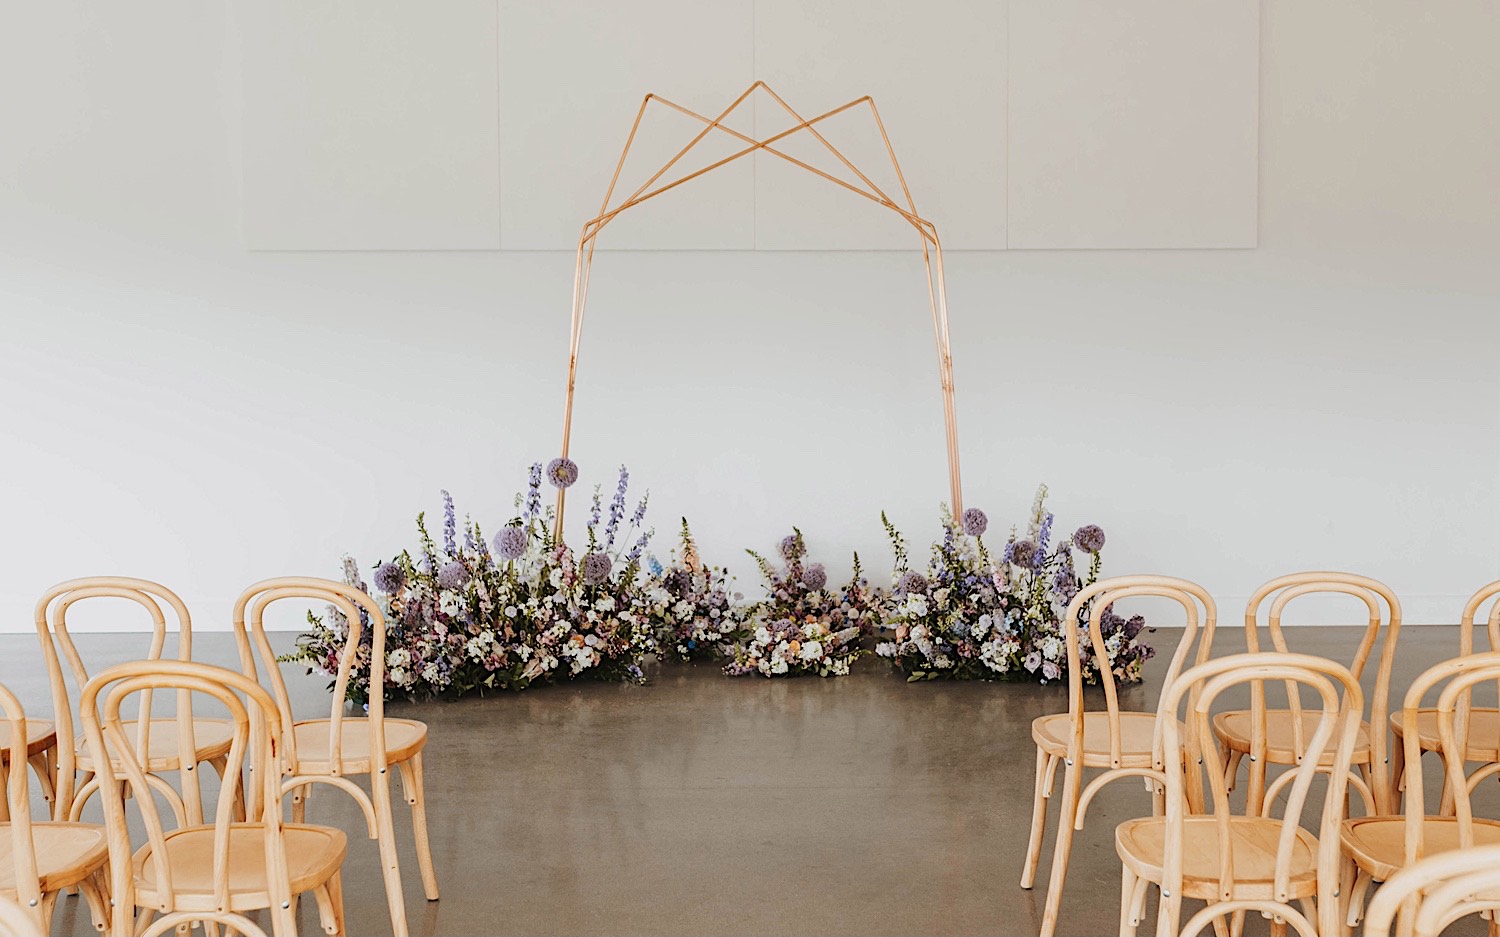 A wedding arch surrounded by flowers stands in the center of the wedding ceremony space at The Aisling